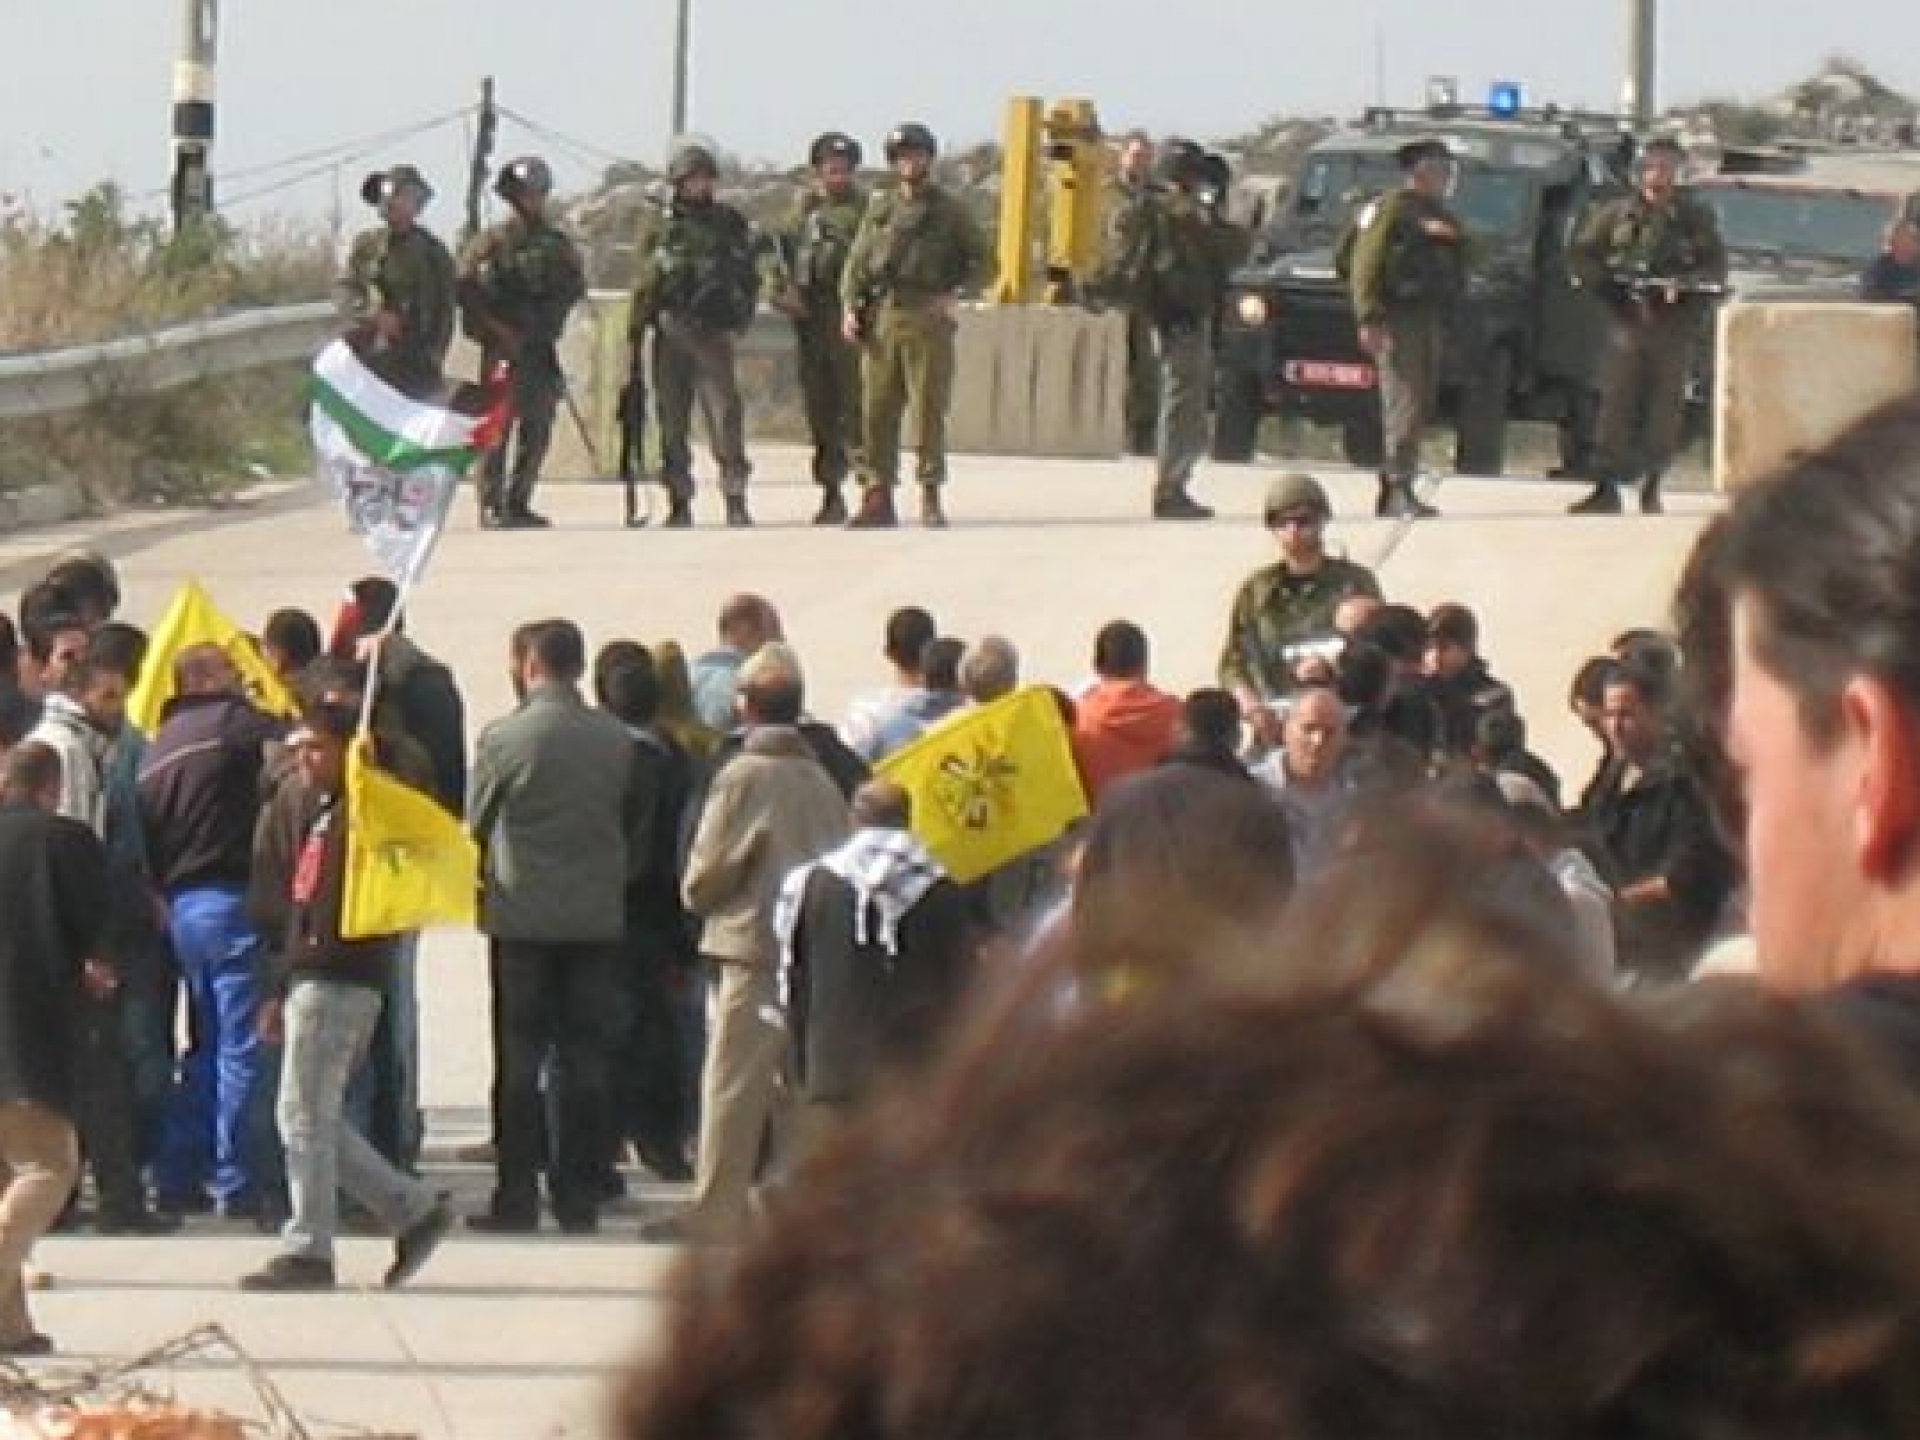 Soldiers and Demonstrators in Tense Confrontation